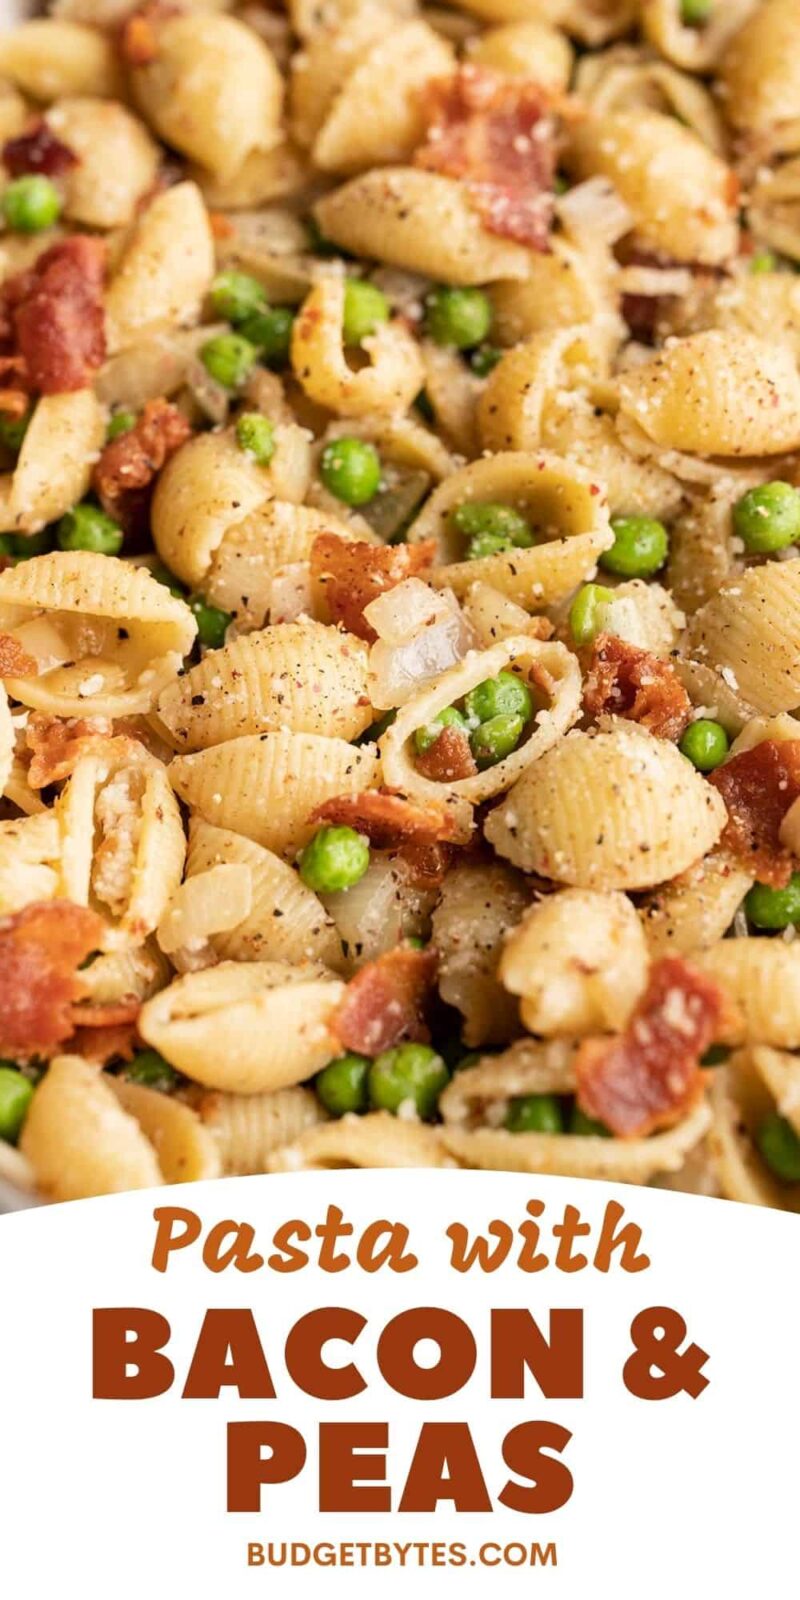 Close up view of pasta with bacon and peas, title text at the bottom.